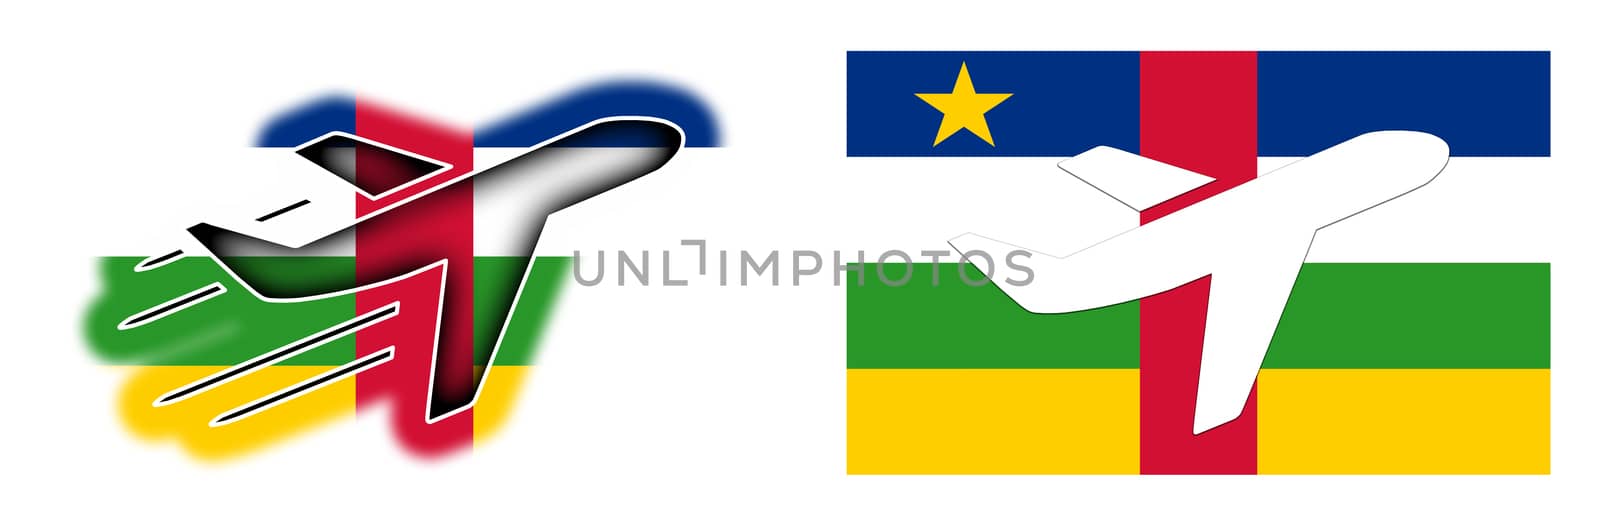 Nation flag - Airplane isolated on white - Central African Republic